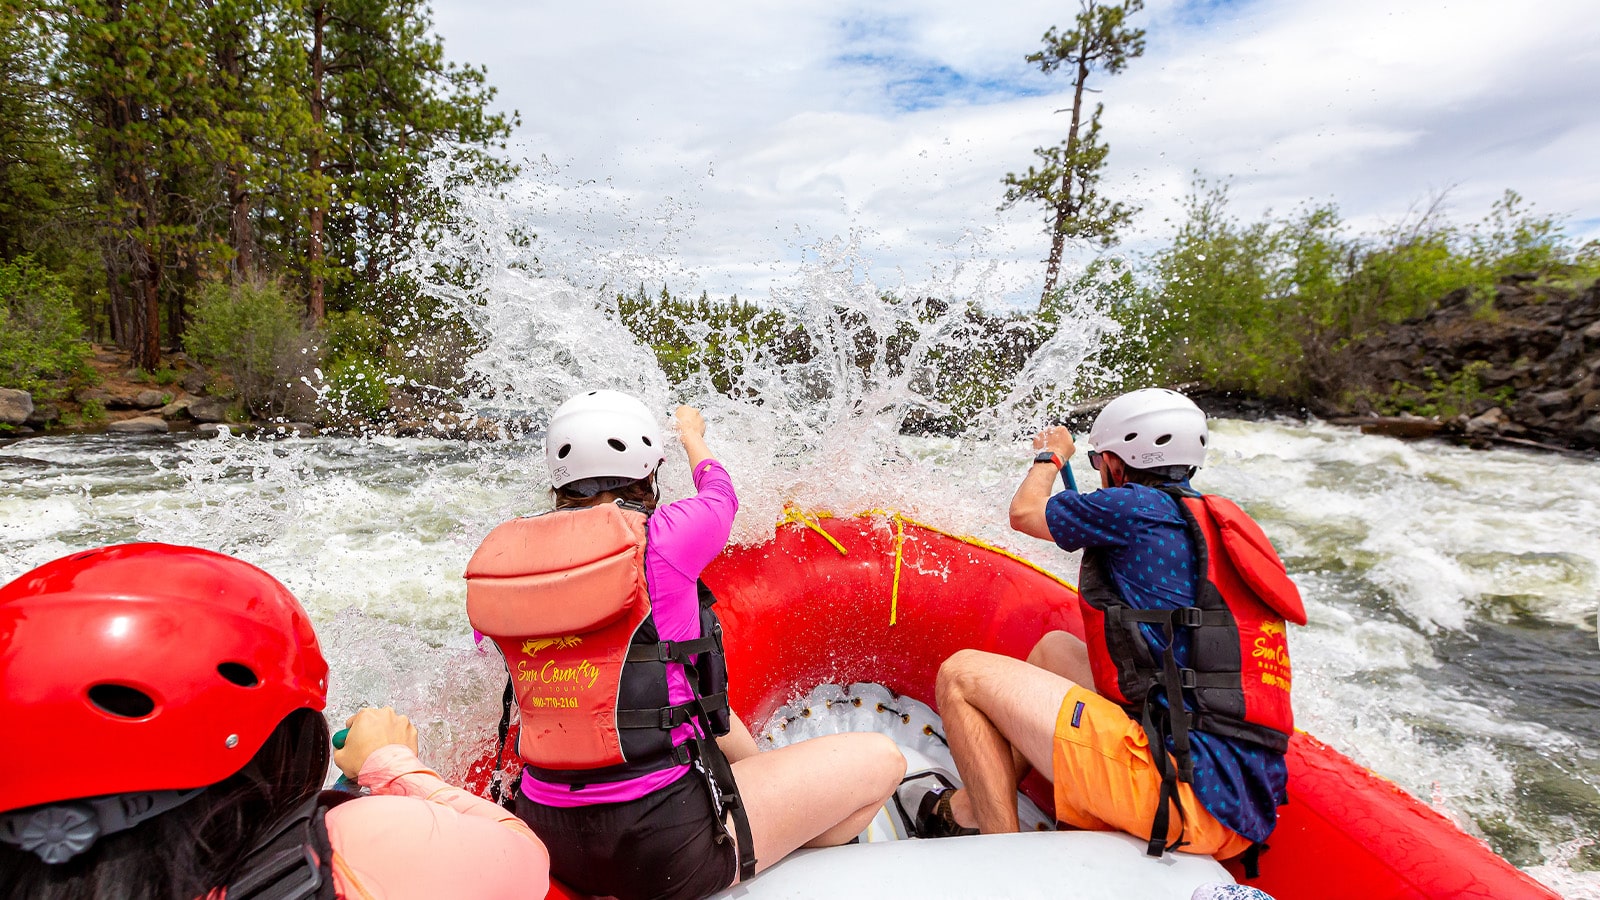 Group rafting on the river in Bend, Oregon.